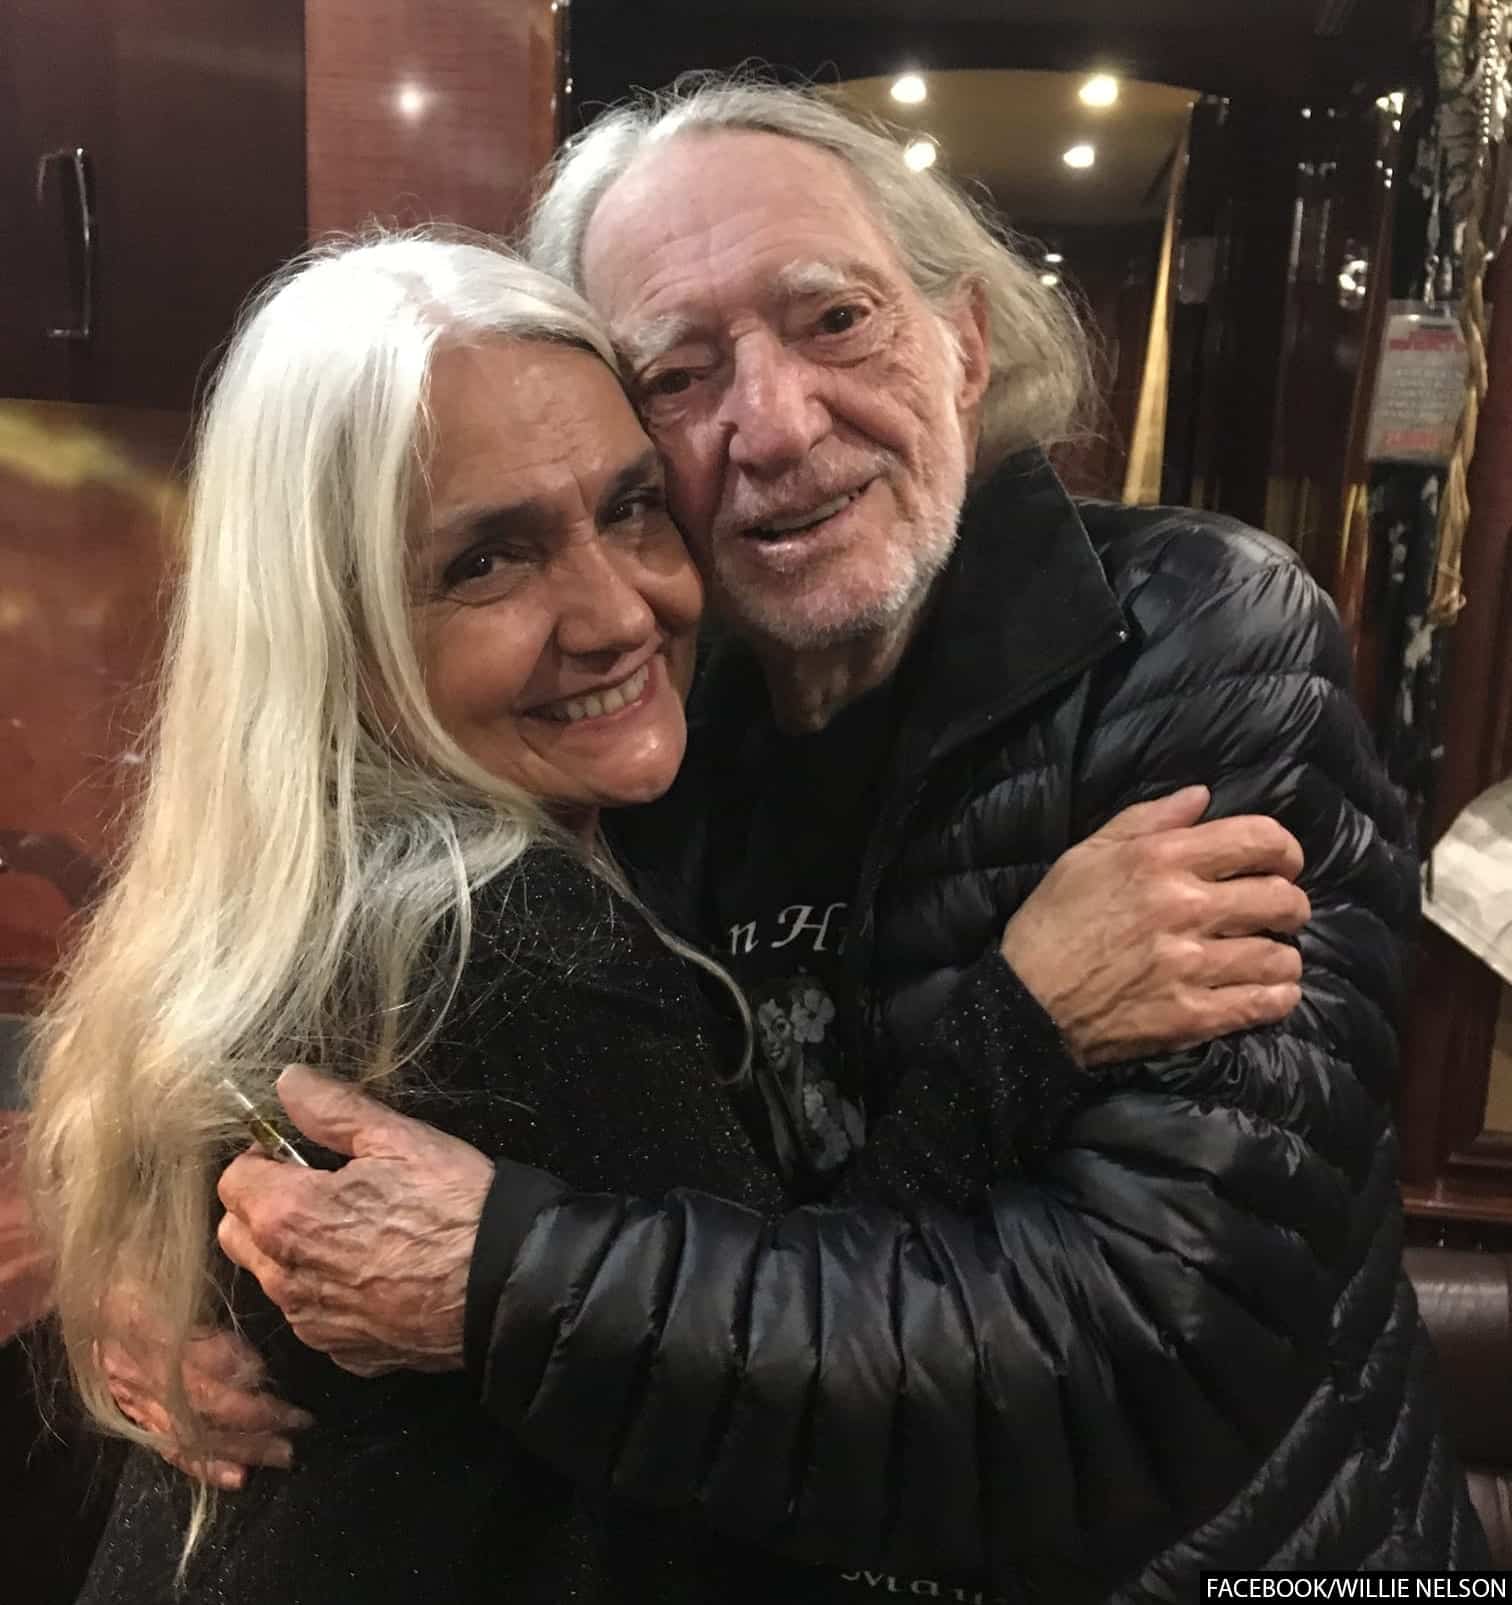 Willie Nelson and Lana Nelson